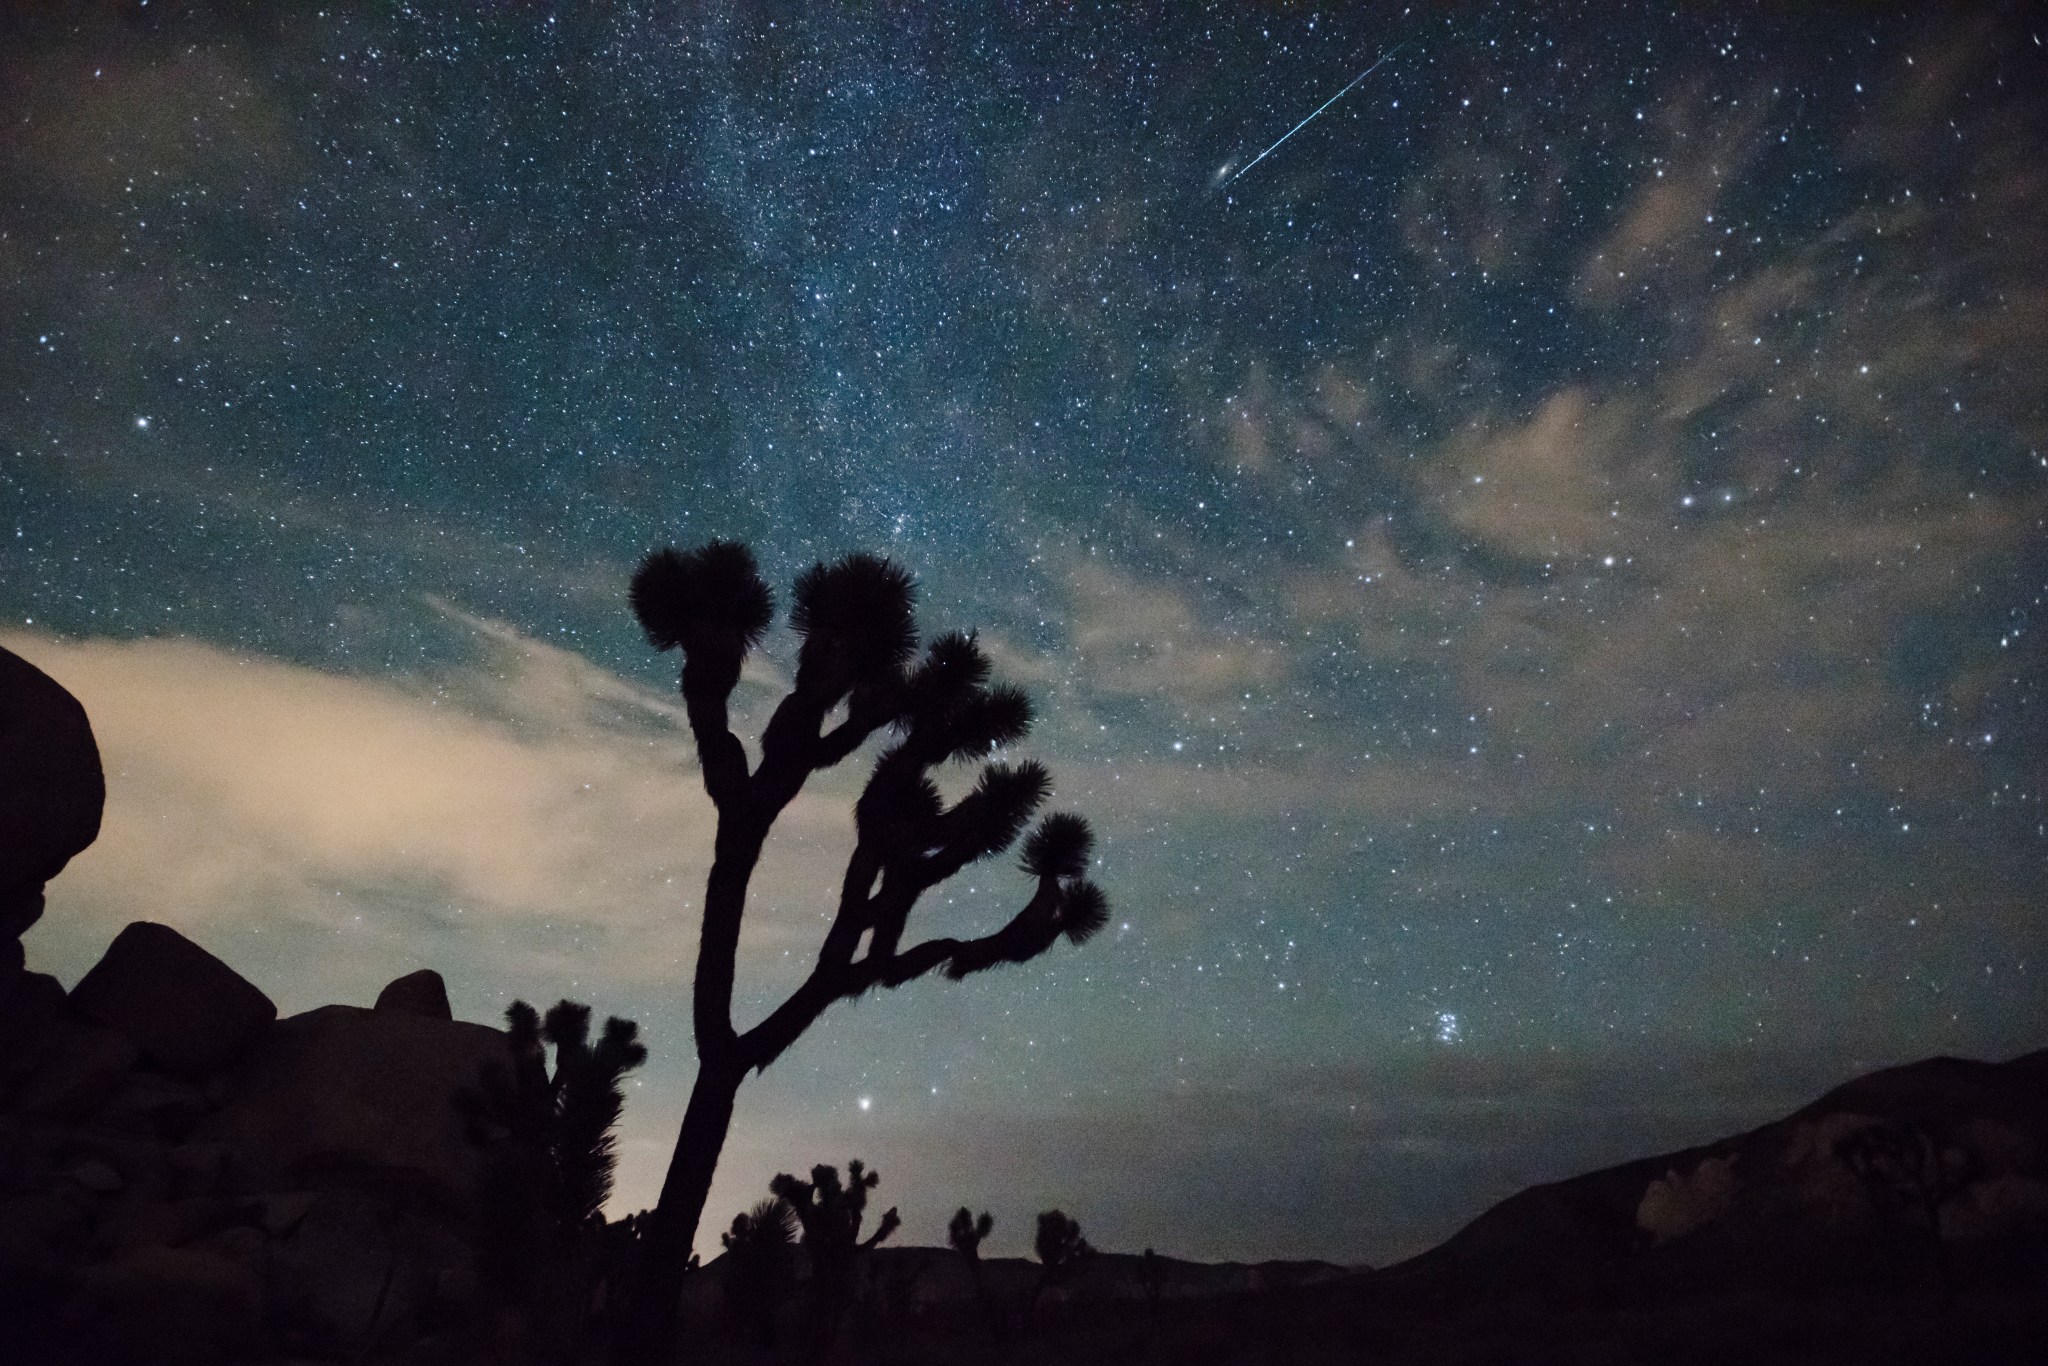 Image of a Perseid meteor streaking over Joshua Tree National Park